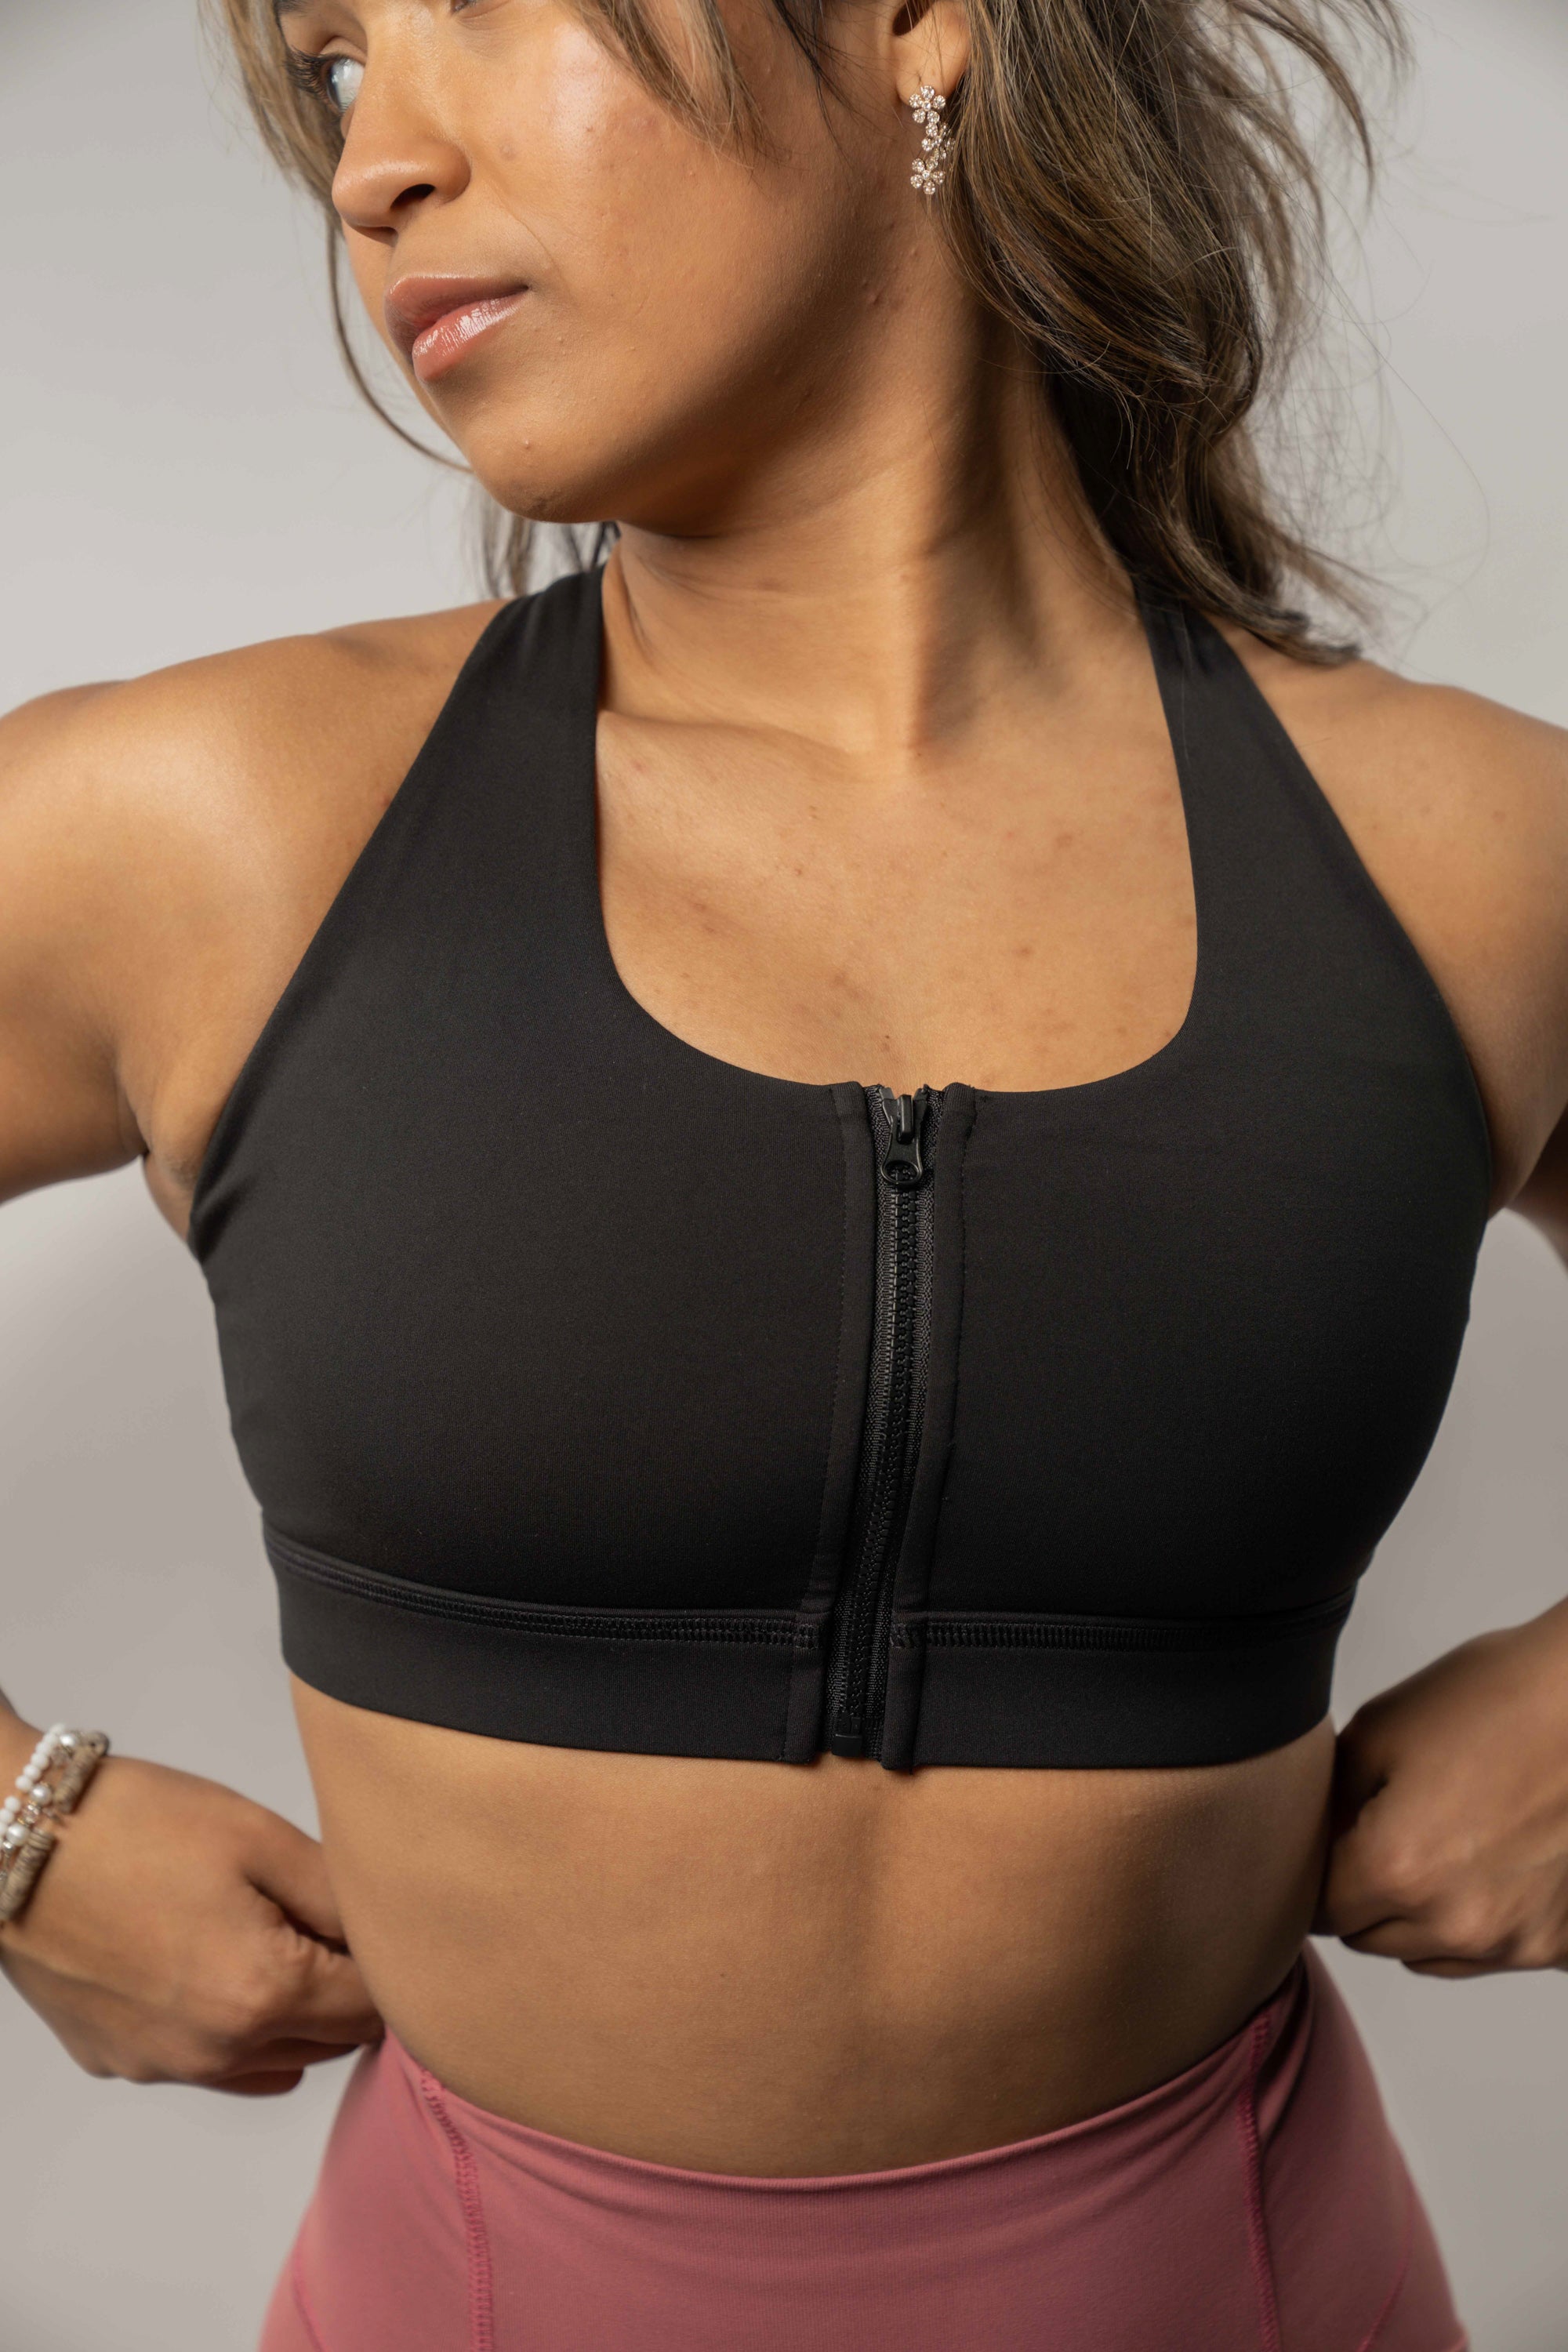 I'm a 28J and tried two viral sports bras, I was 'spilling out